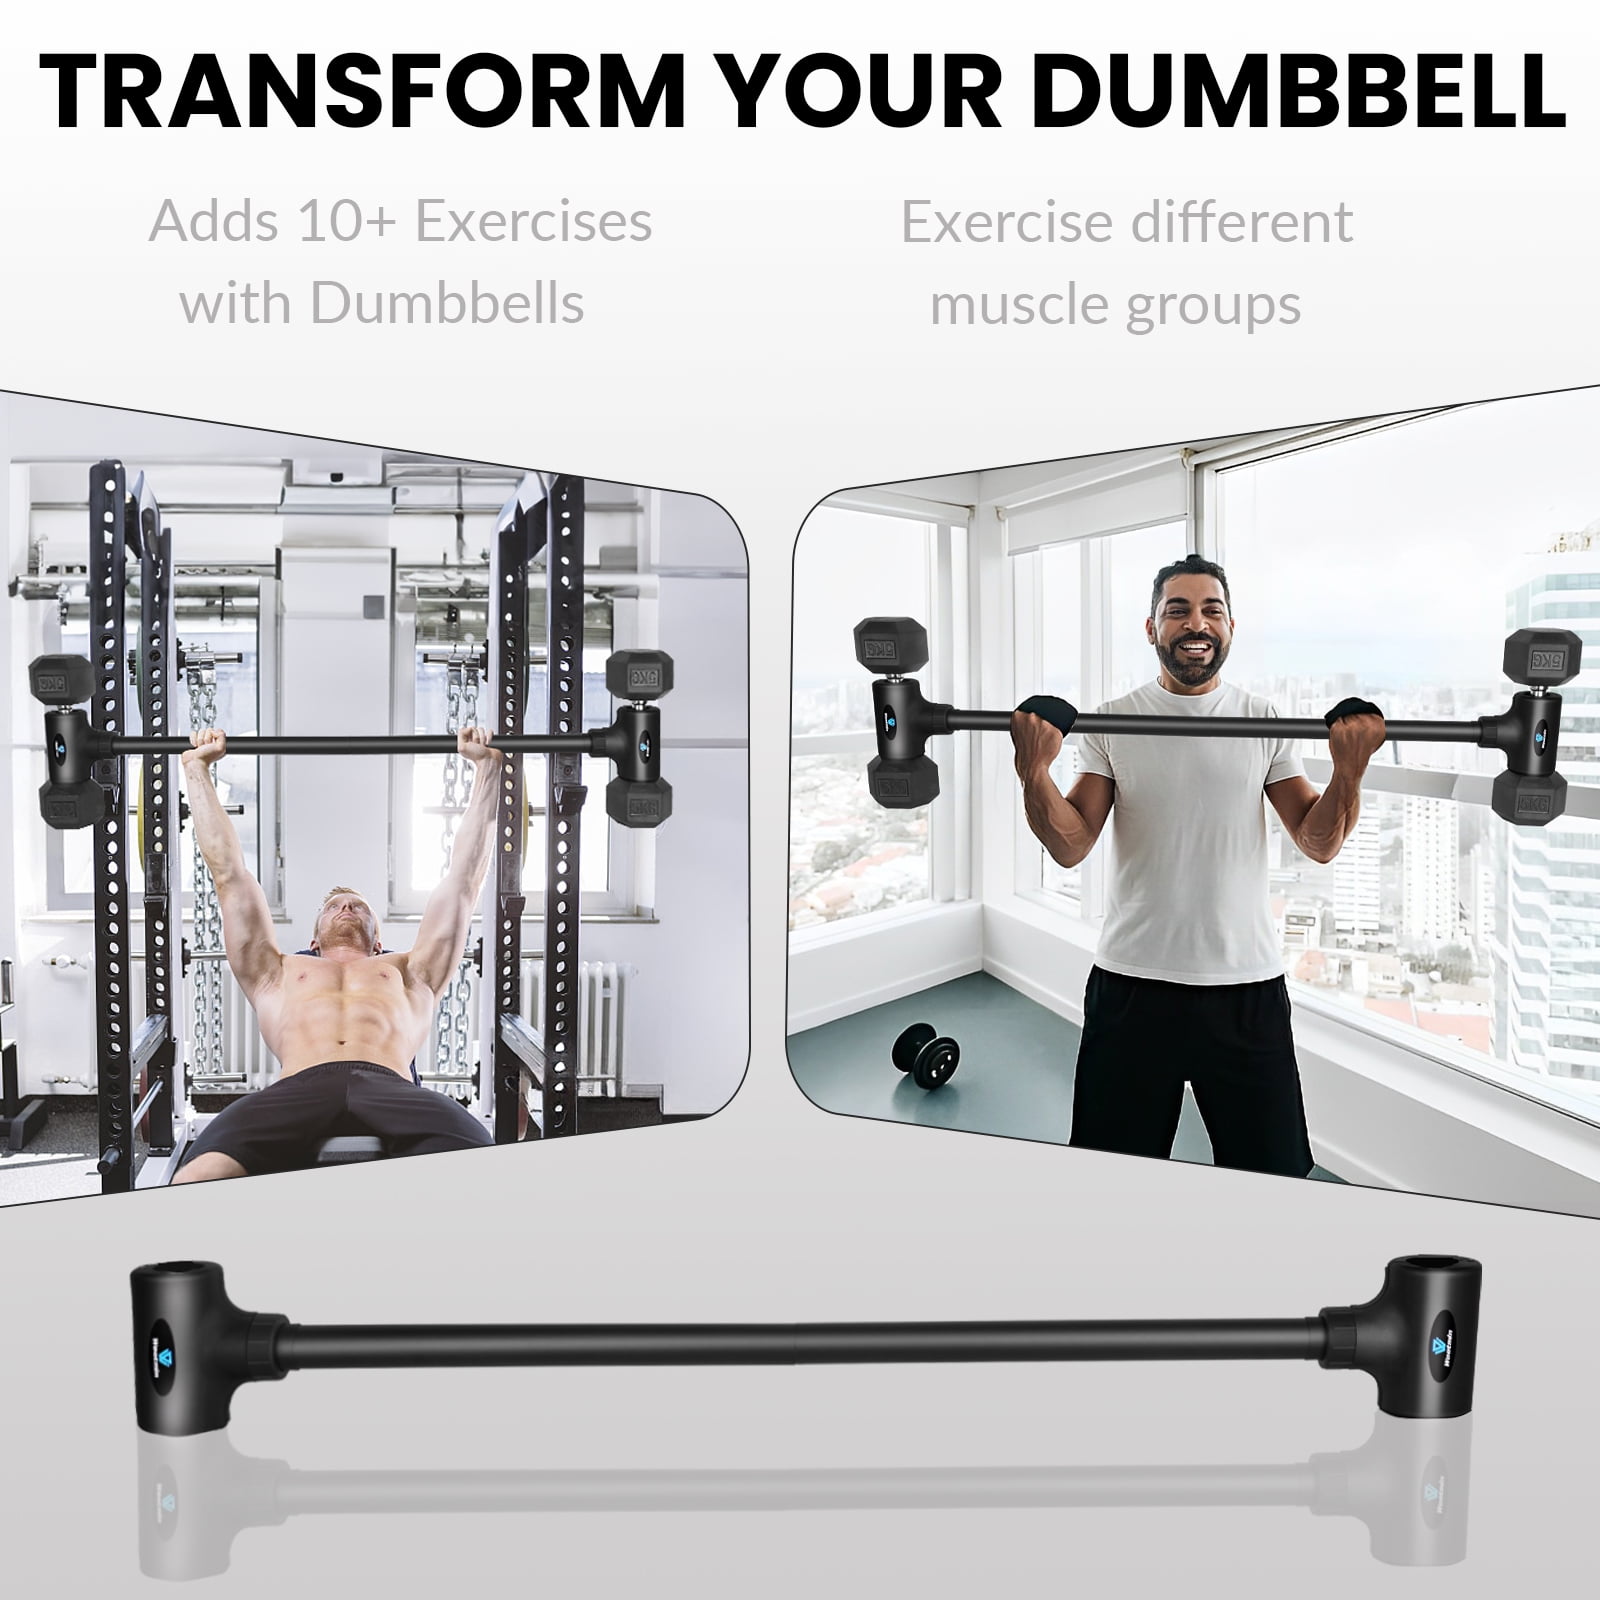 WOOTMIN Dumbbell Converter - Converts dumbbells into barbell sets and  kettlebells - Dumbbell bar, adjustable and up to 200 lb barbell for home  fitness 